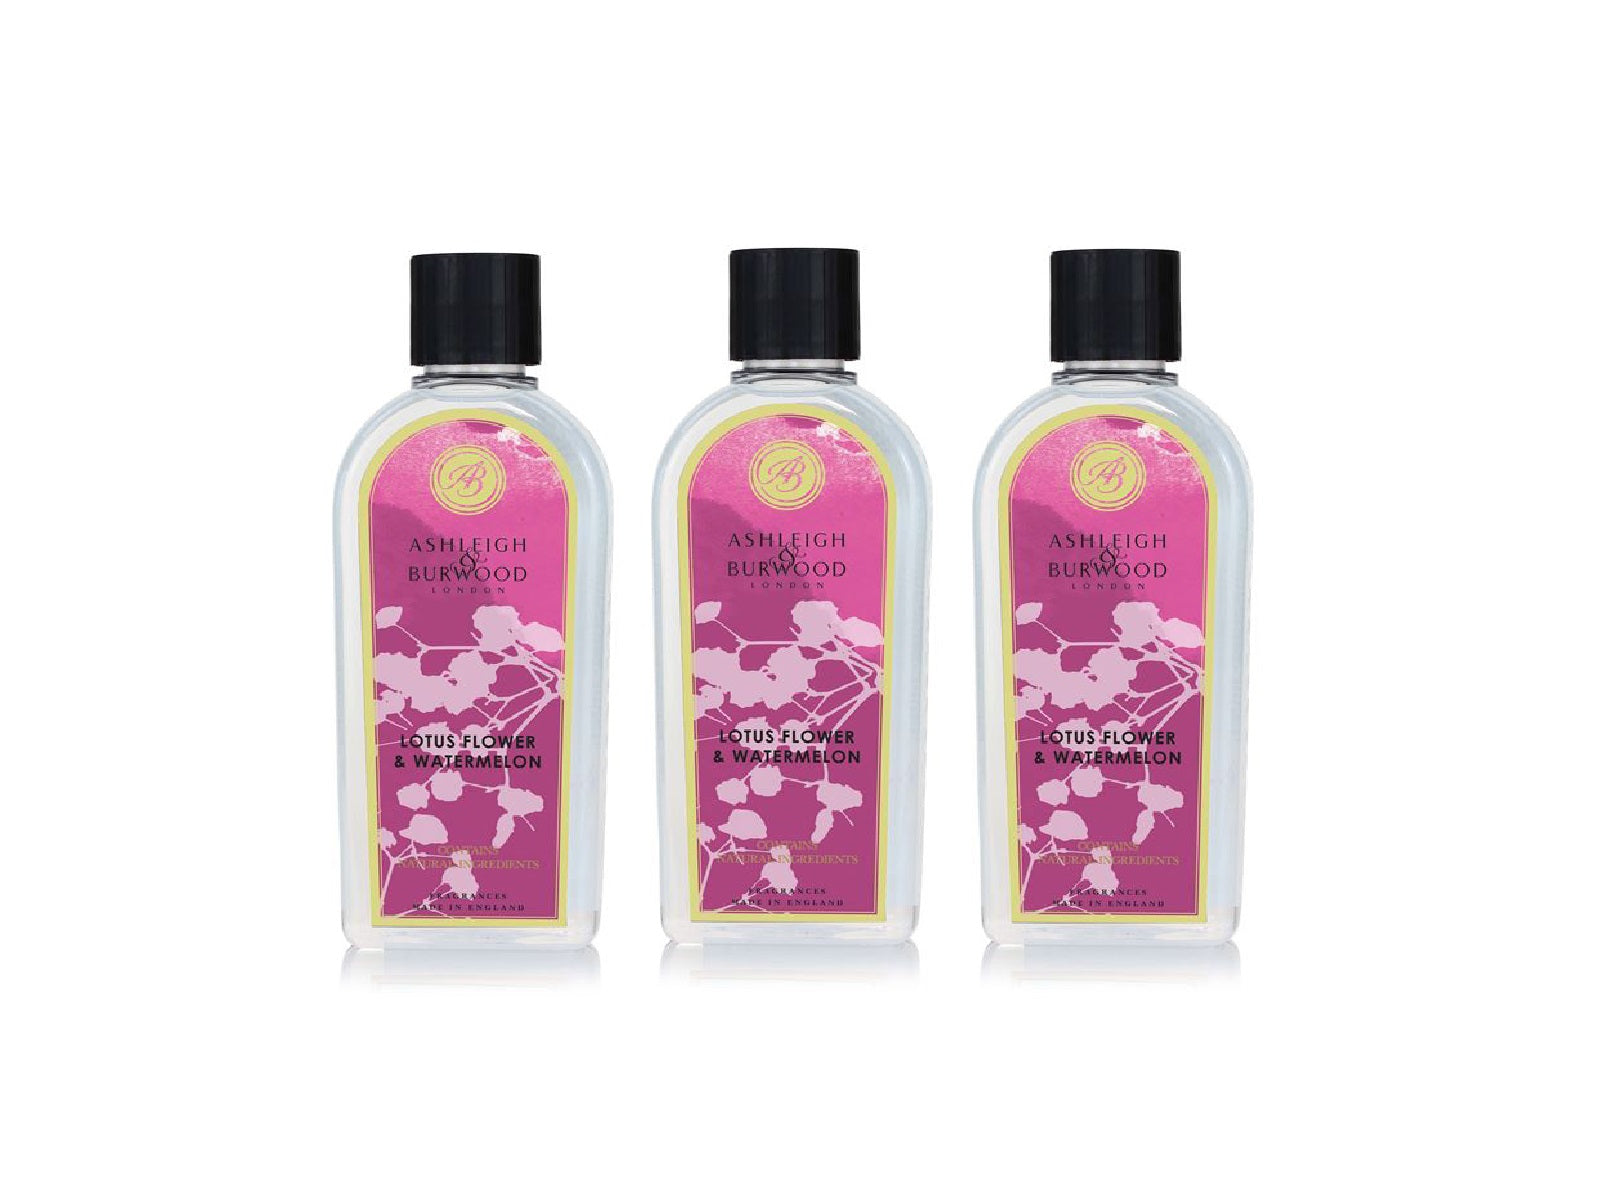 Three bottles of lotus flower and watermelon scented lamp fragrance liquid in clear bottles with pink floral labels and black caps